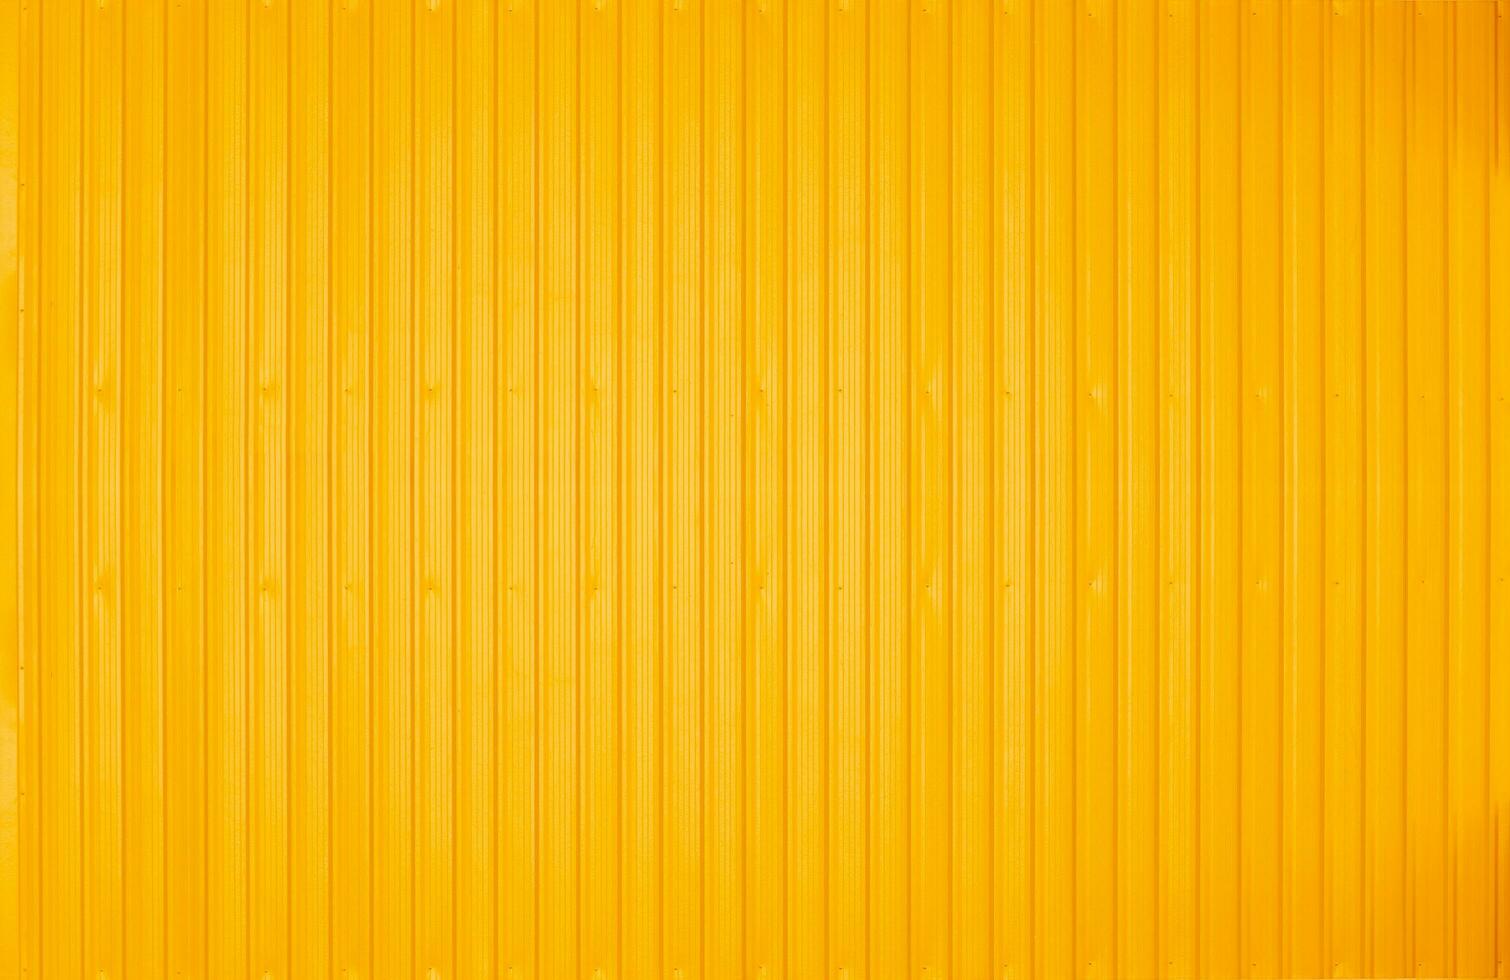 Panoramic Yellow Metal Sheet Walls Images For Background. photo